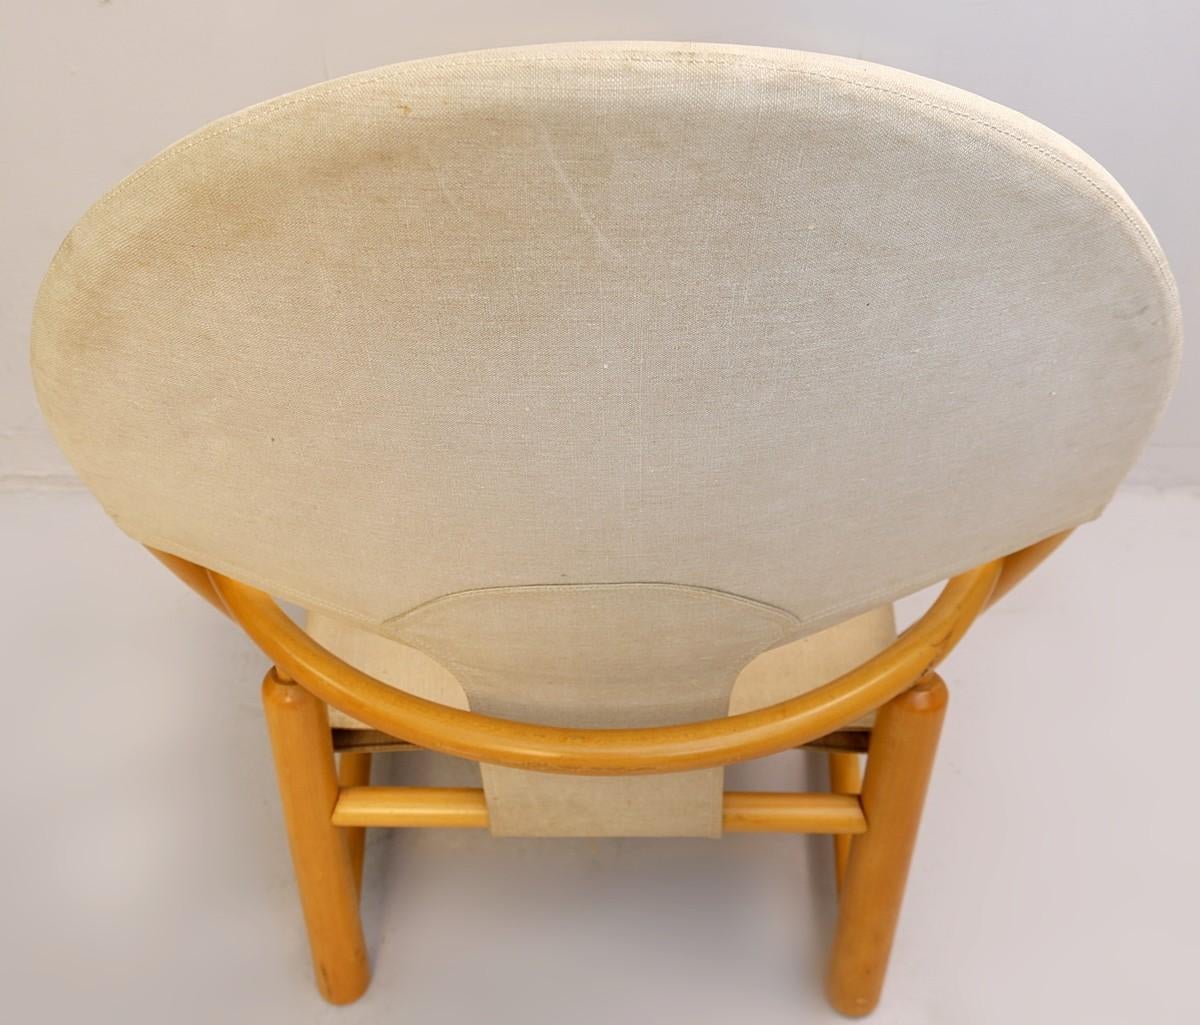 20th Century Mid-Century Modern G23 Hoop Armchair by Piero Palange & Werther Toffoloni, Germa For Sale